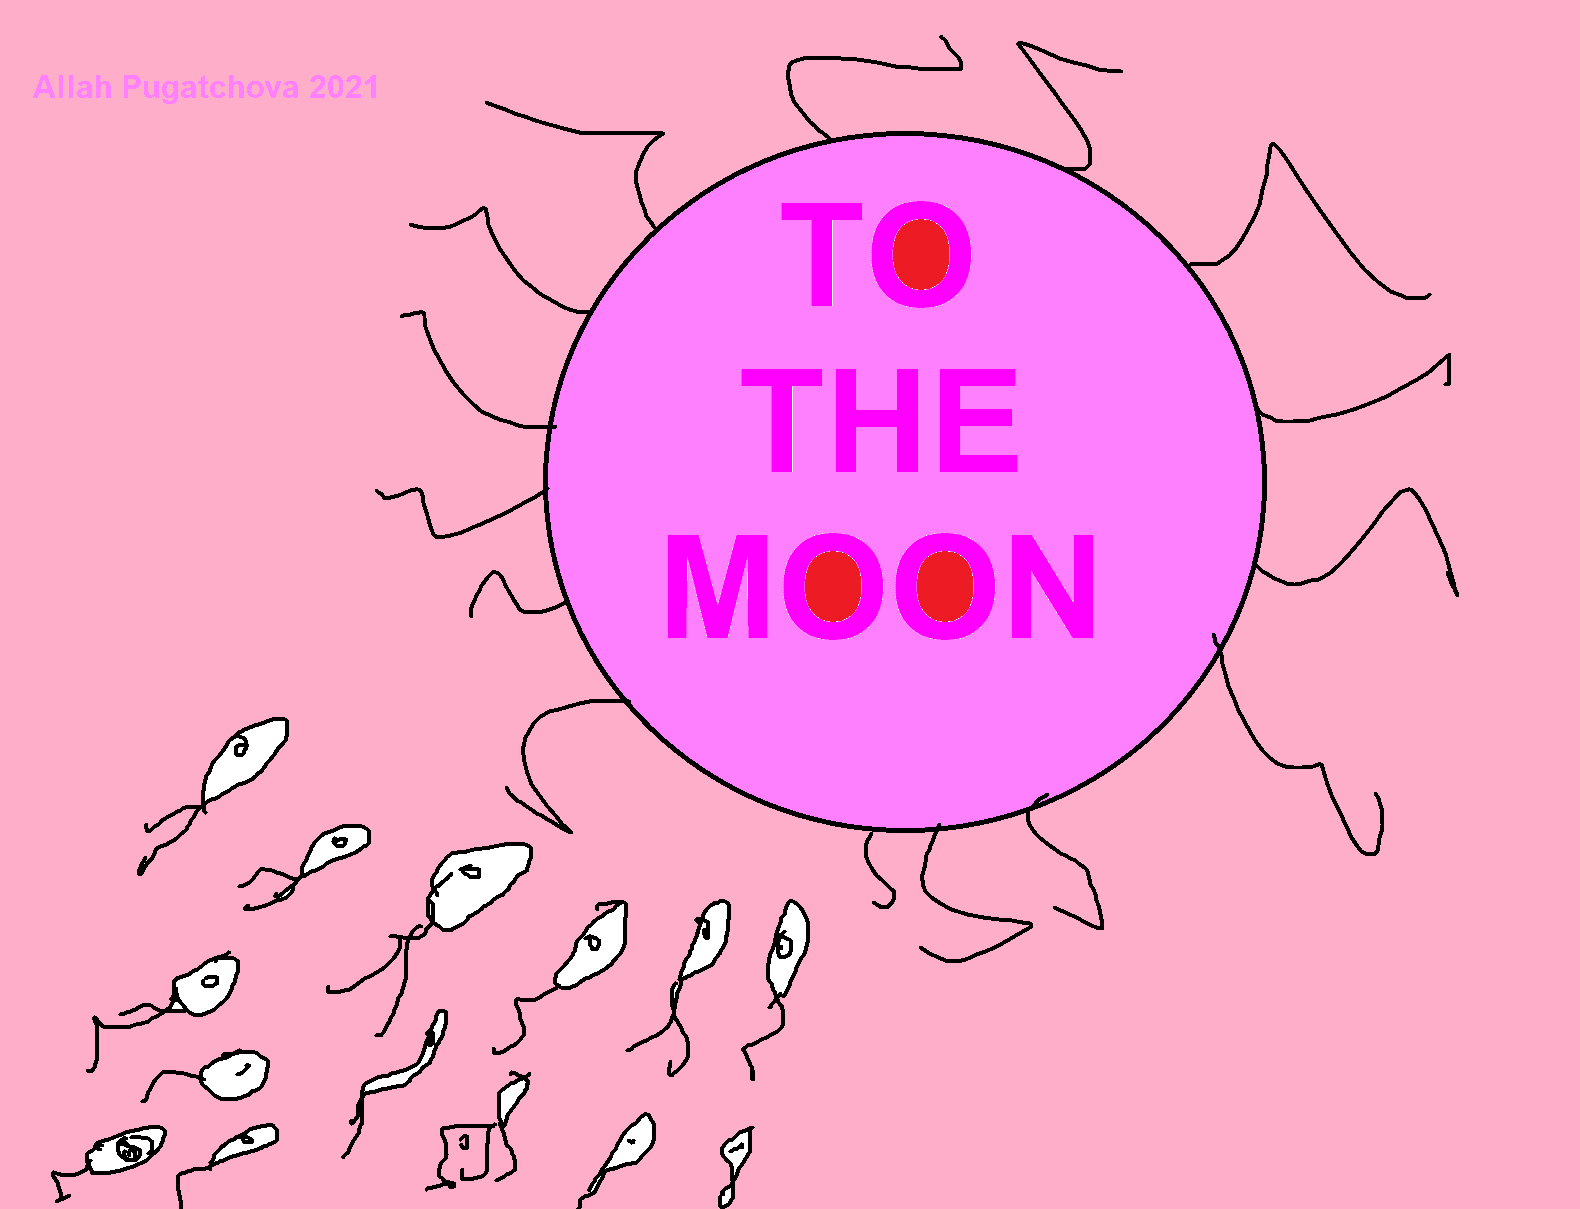 "To the Moon" by Allah Pugatchova